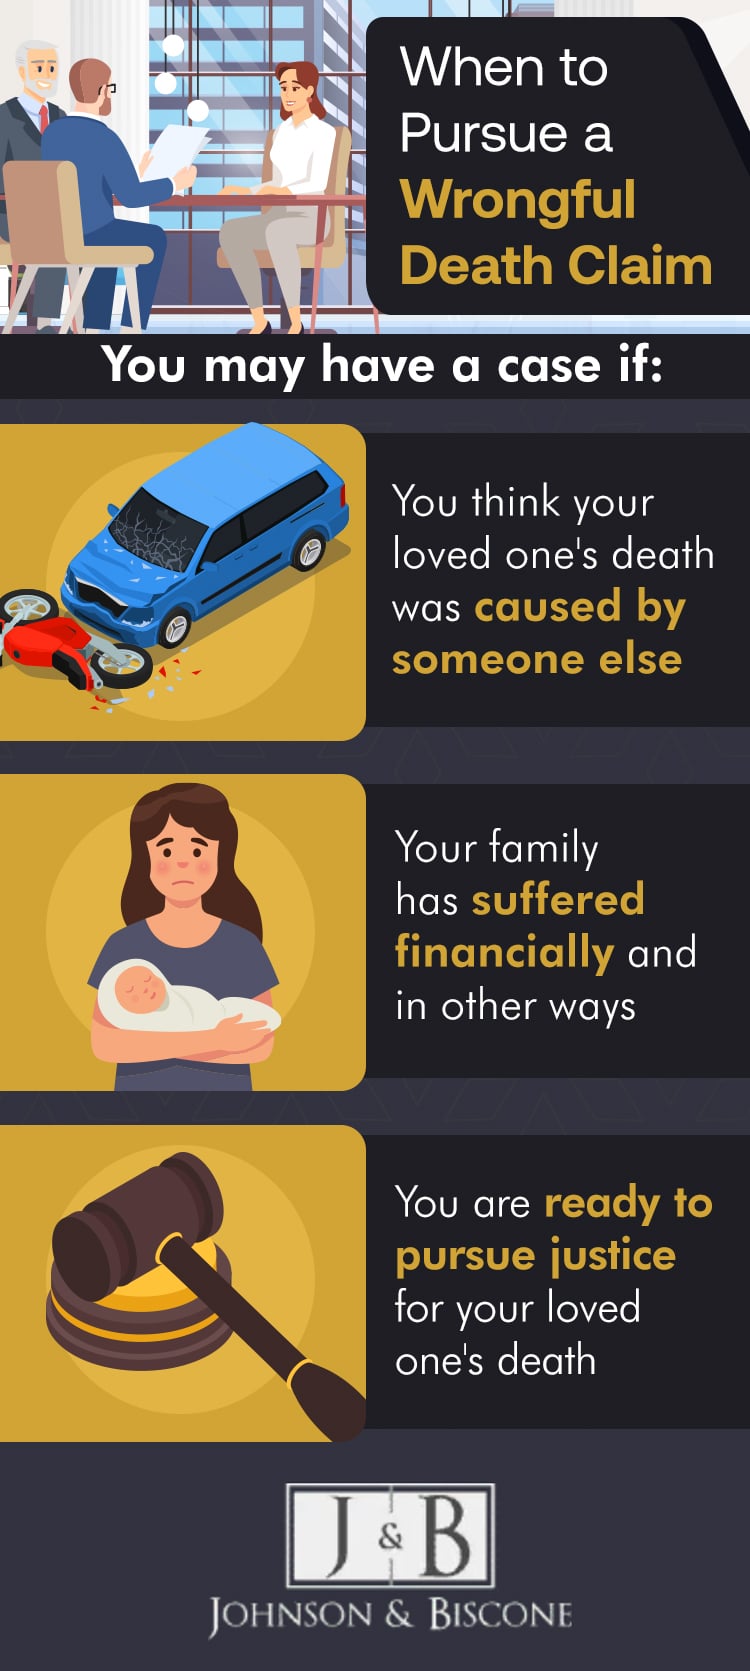 An infographic showing when to pursue a wrongful death claim